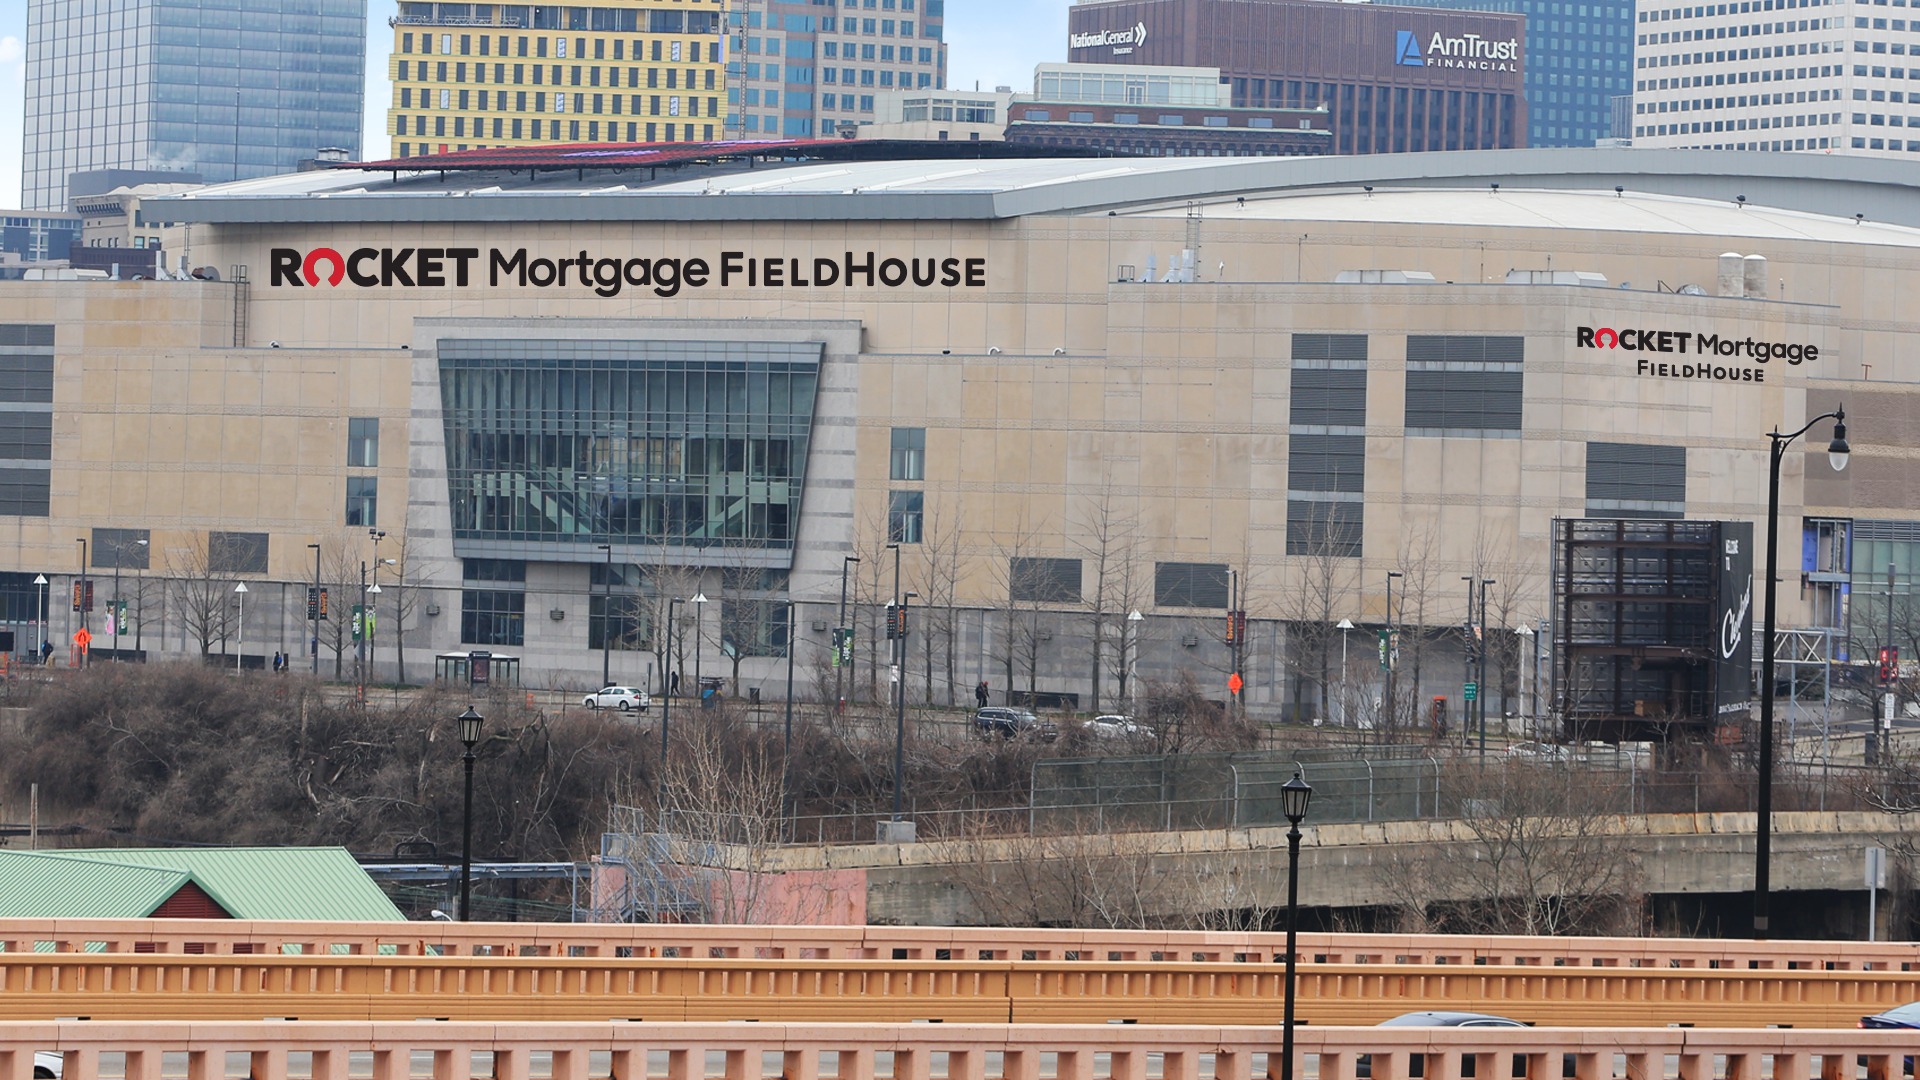 Rocket Mortgage FieldHouse A new identity for a transformed arena